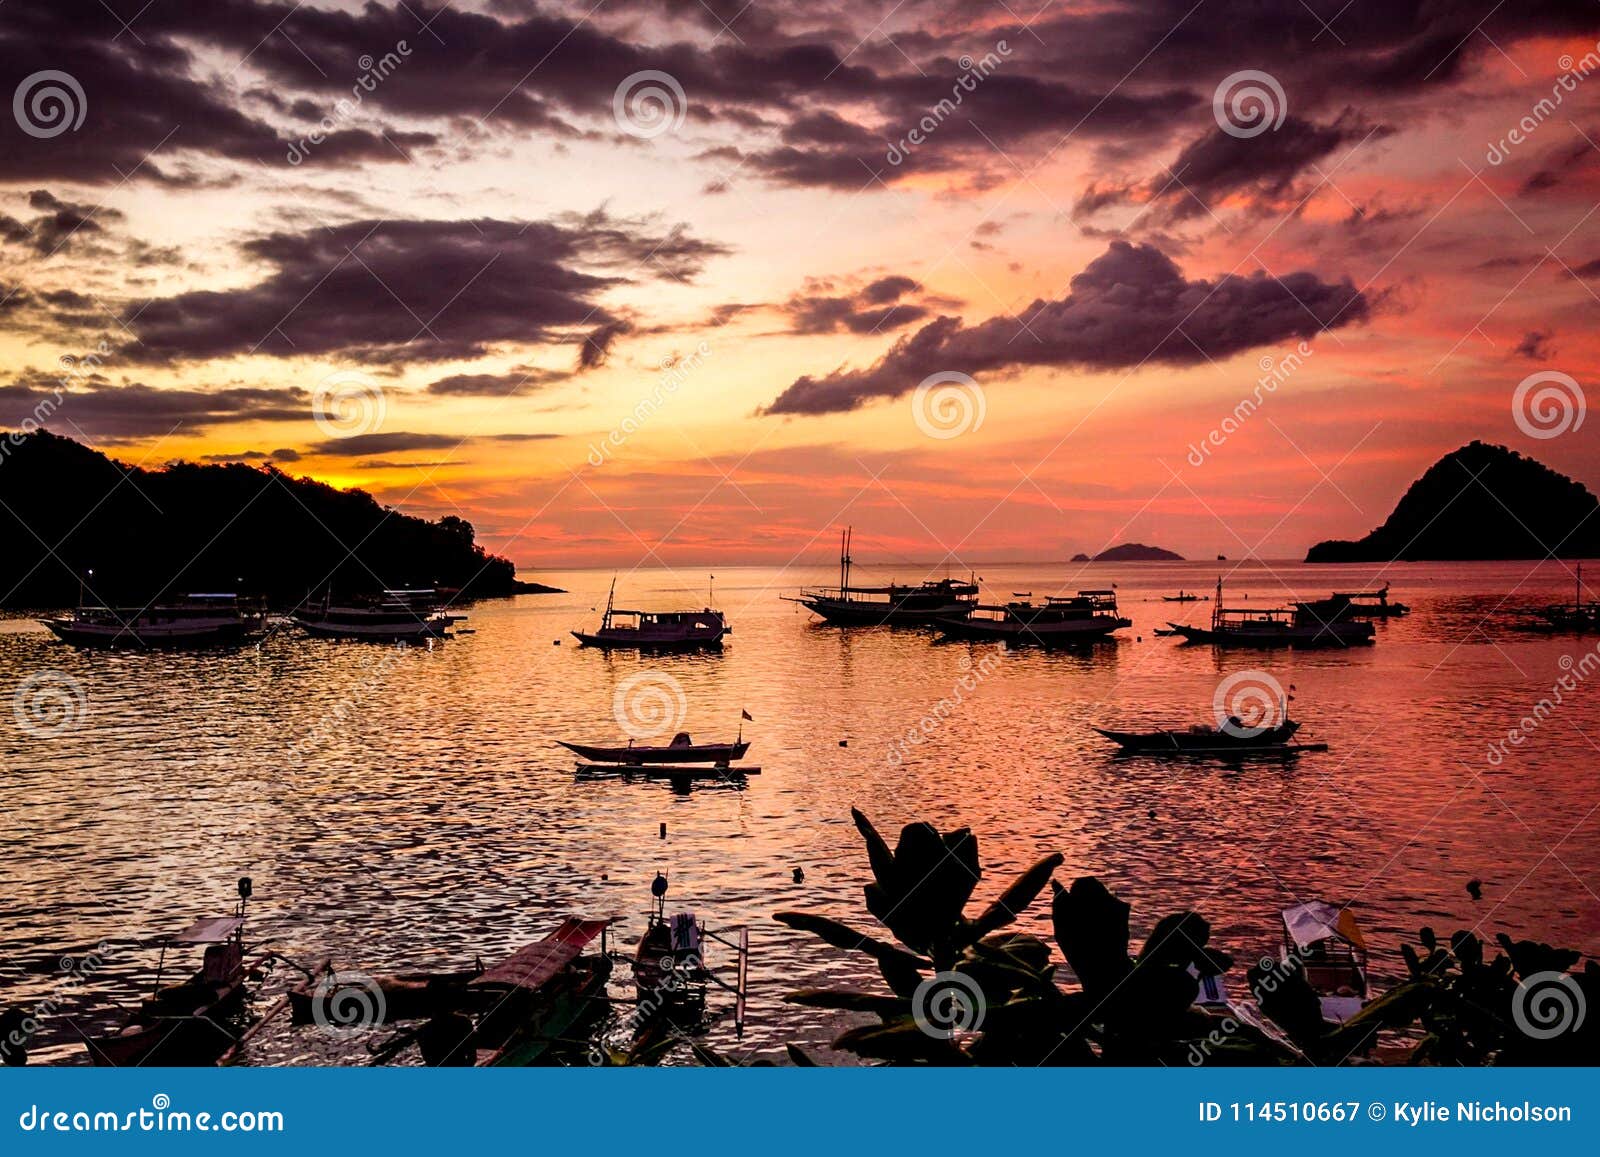 Sunset in Labuan Bajo, Flores, Indonesia Stock Image - Image of